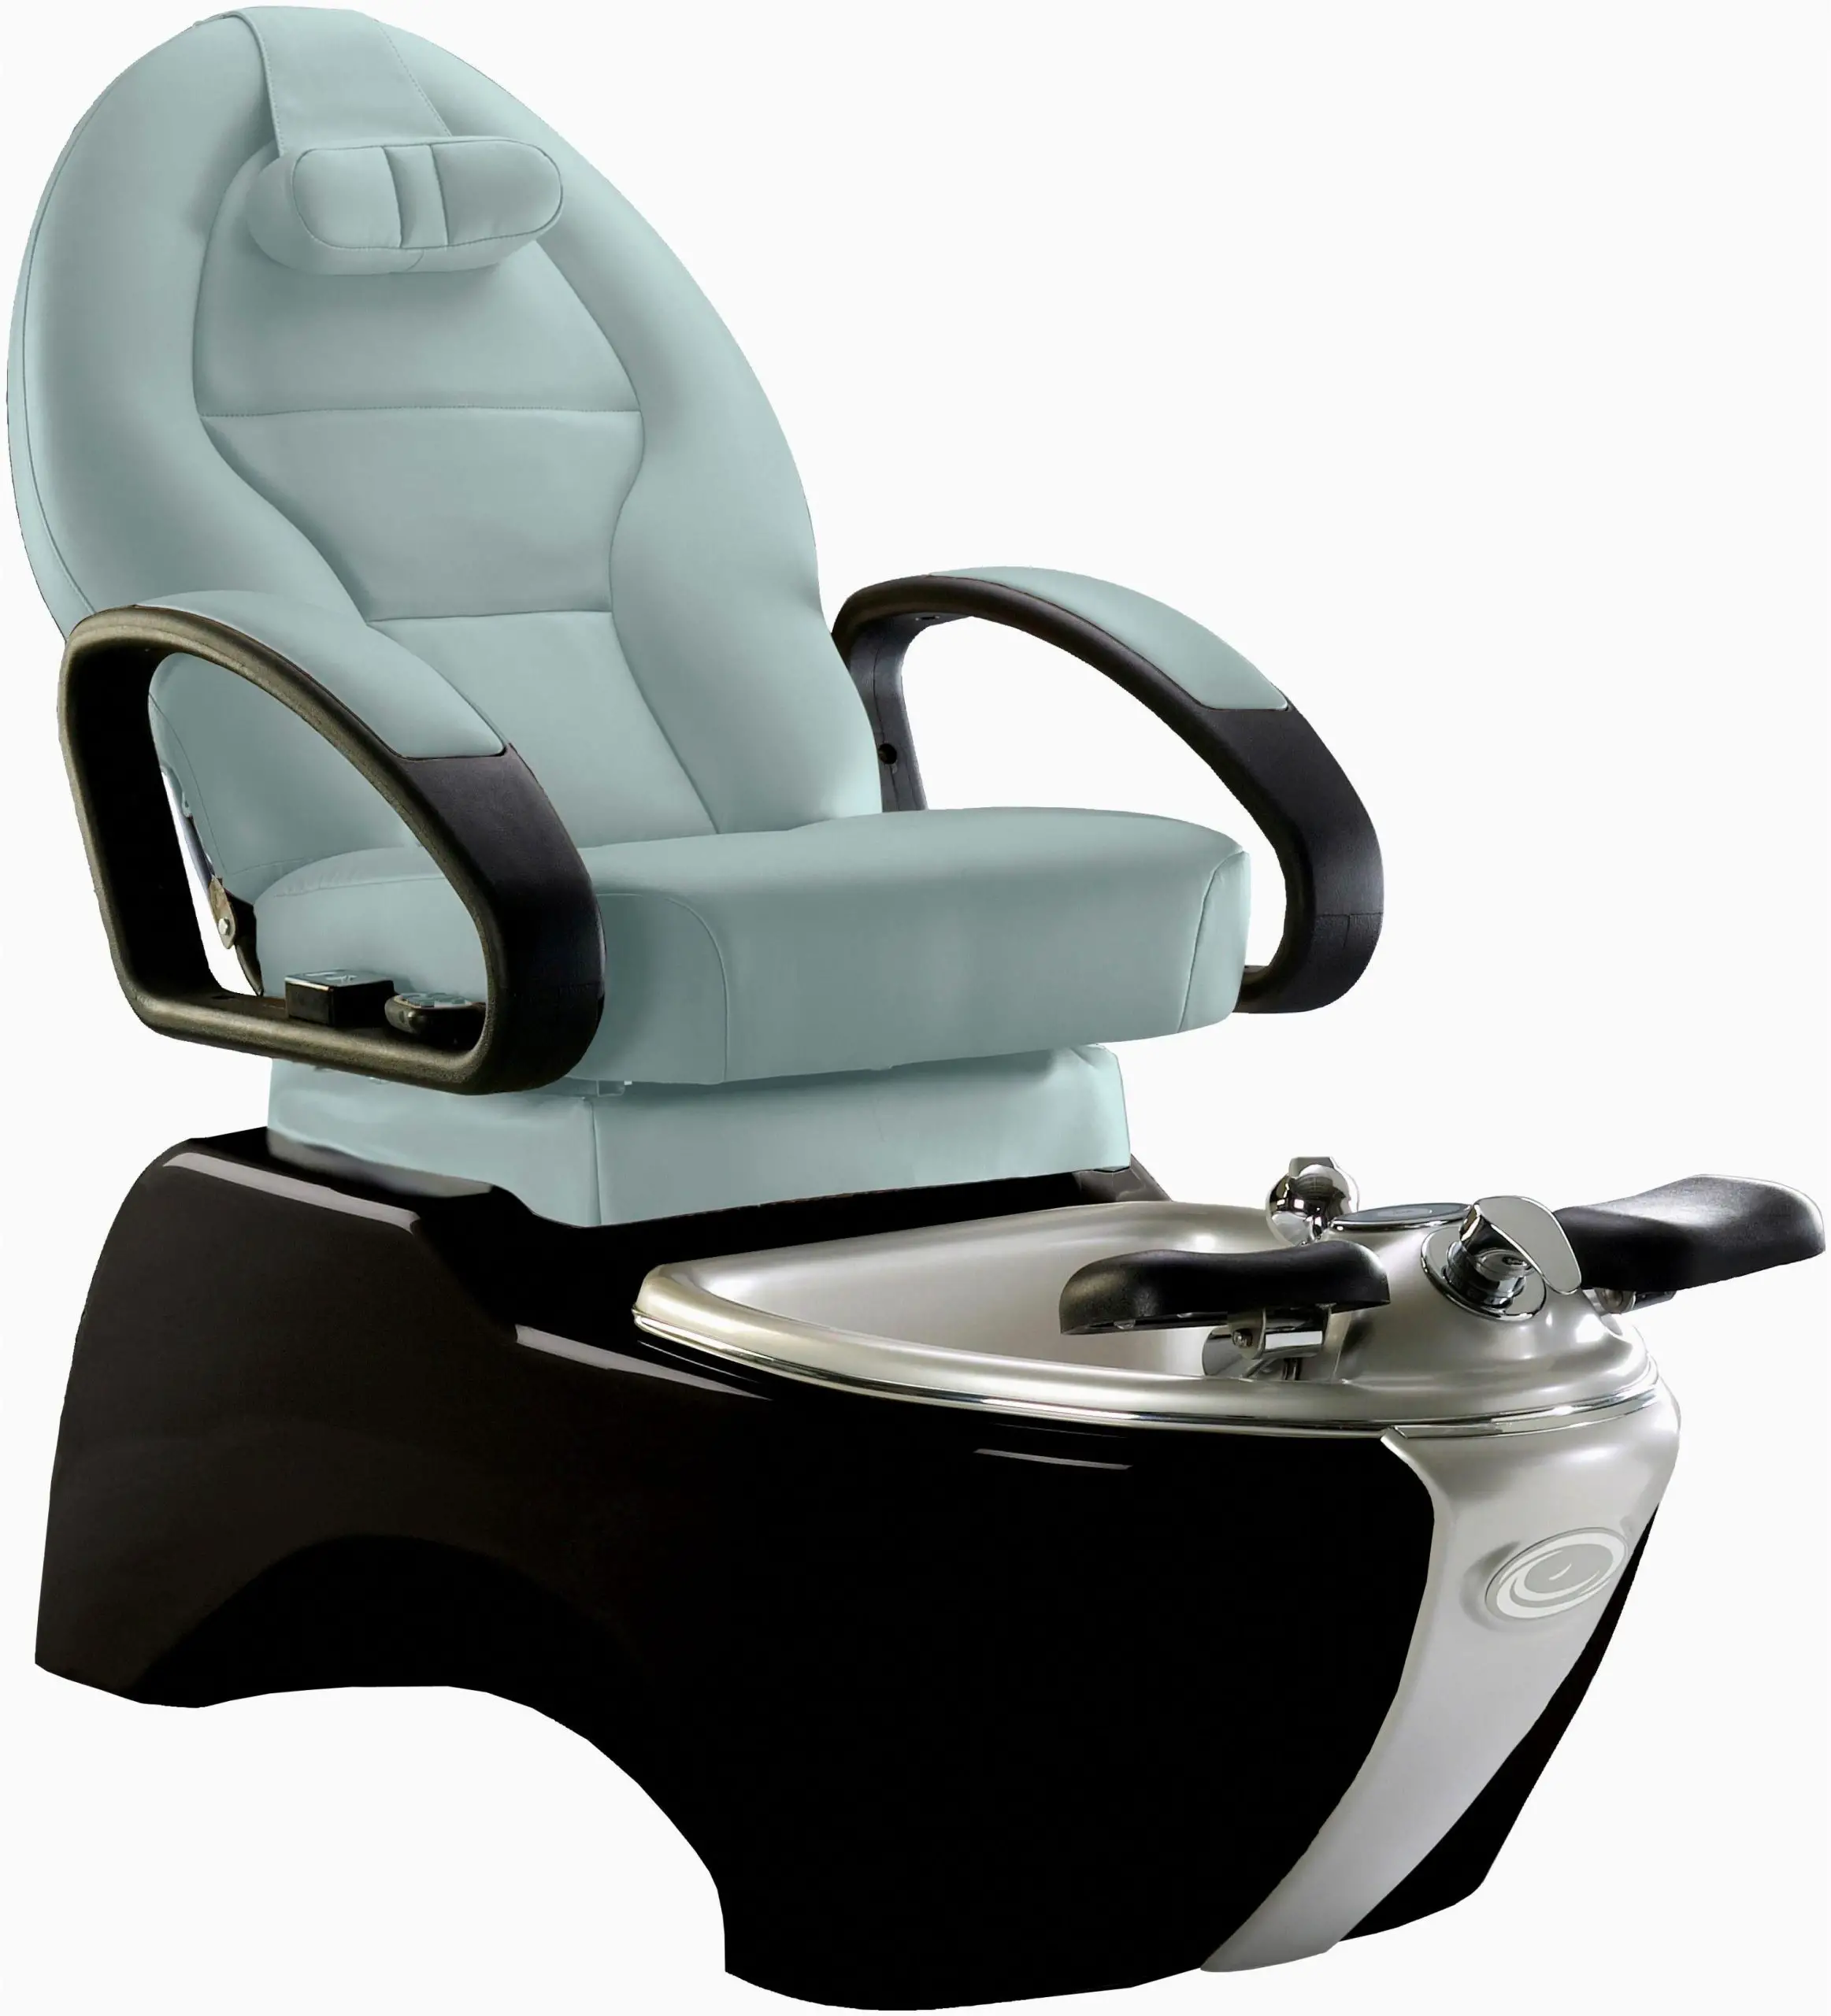 Pedicure Chairs For Sale #massagetableshacks